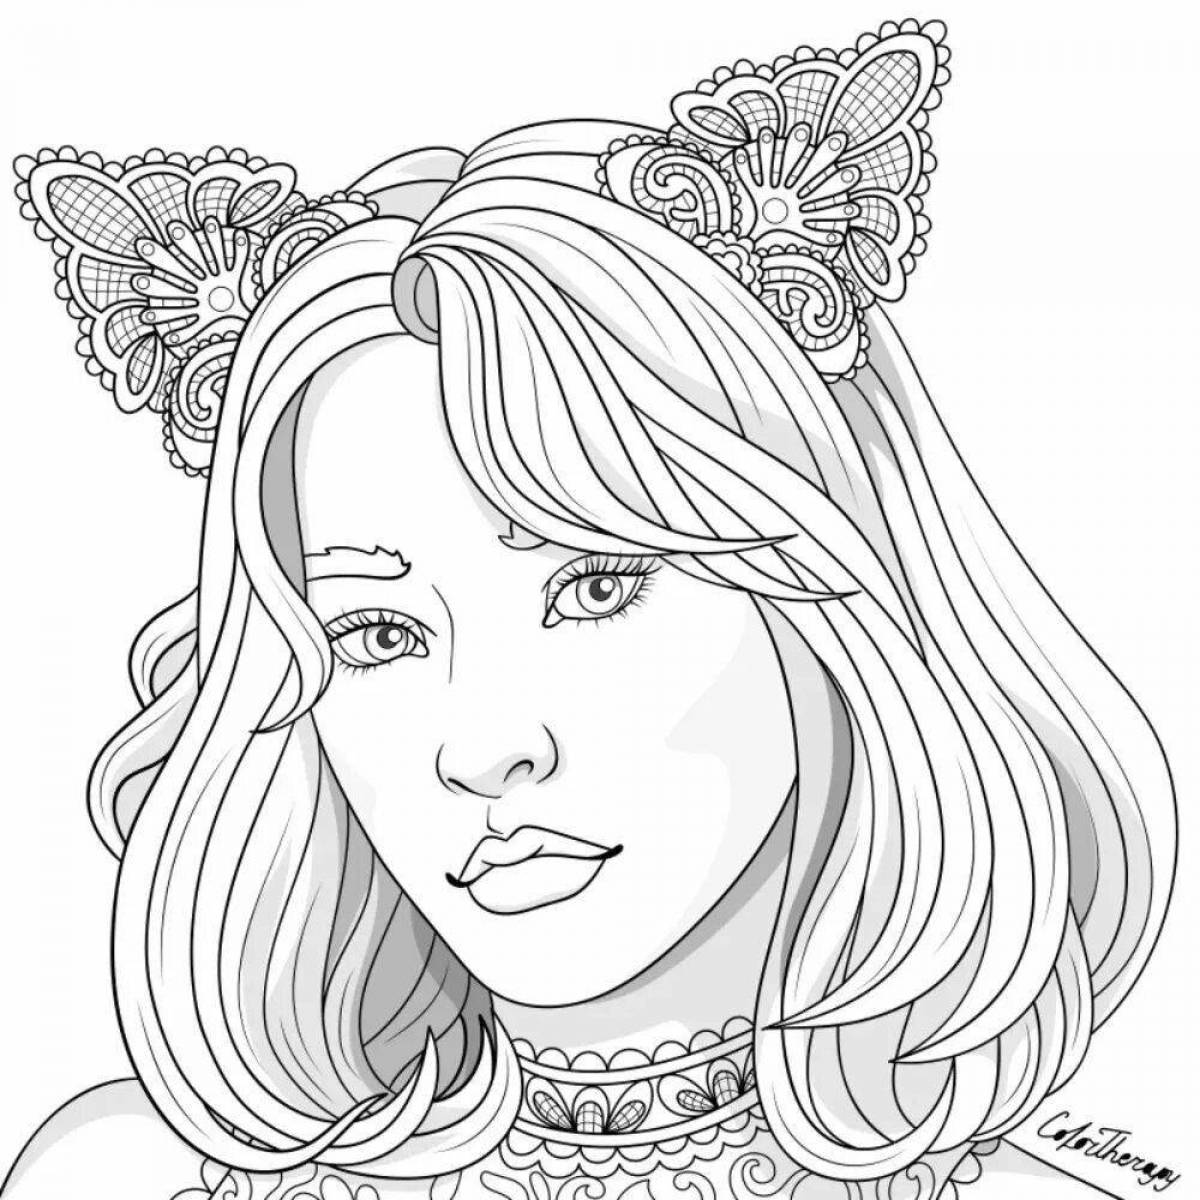 Colorific coloring page 9-10 years old